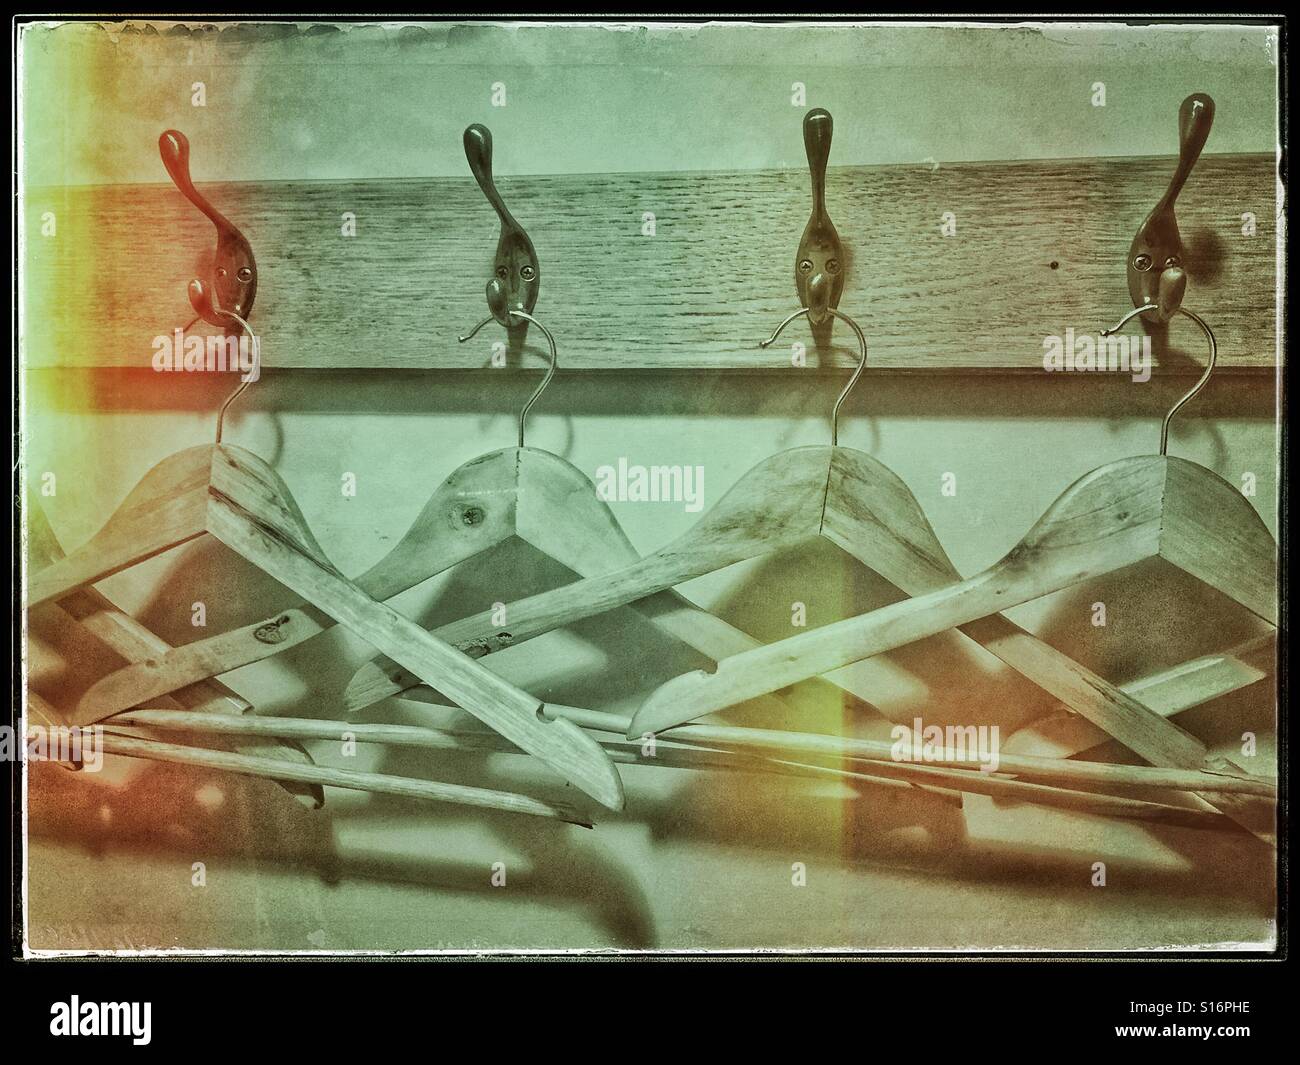 A retro effect image of a row of wooden coat hangers and pegs awaiting use. Why are they so close together? Where are the jackets & coats? Photo Credit - © COLIN HOSKINS. Stock Photo